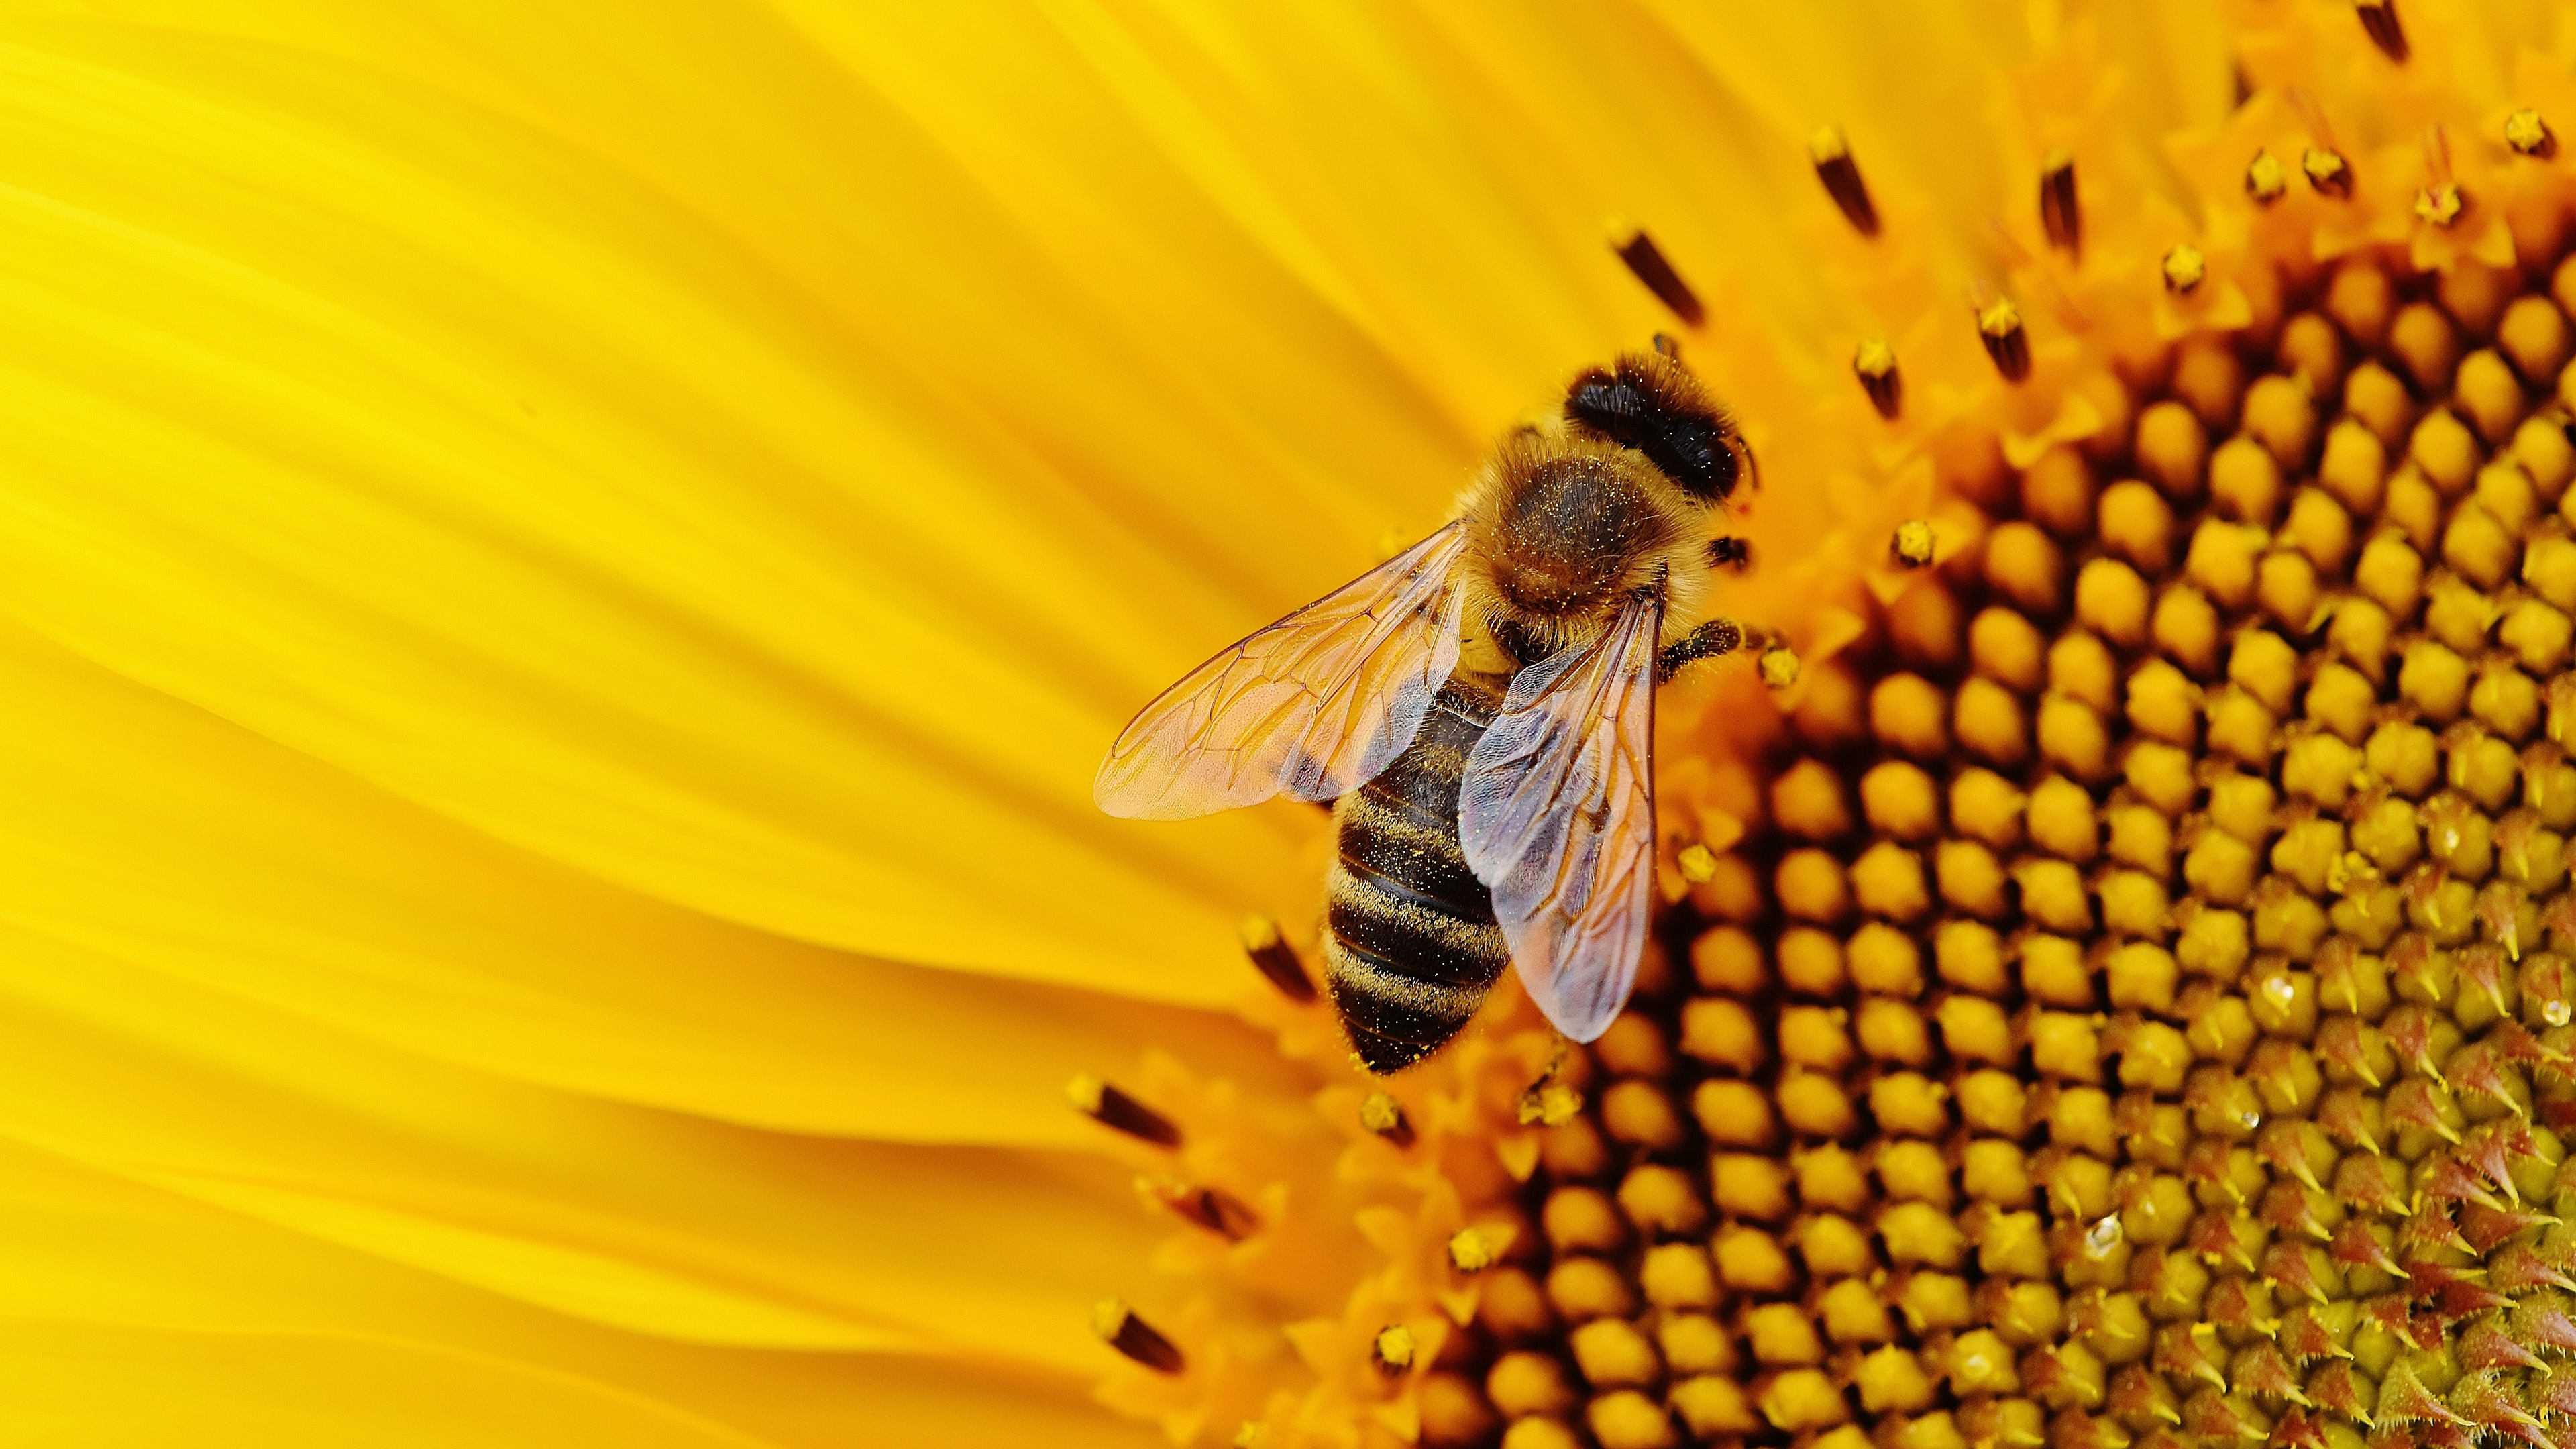 Flower Insect Sunflower 3840x2160